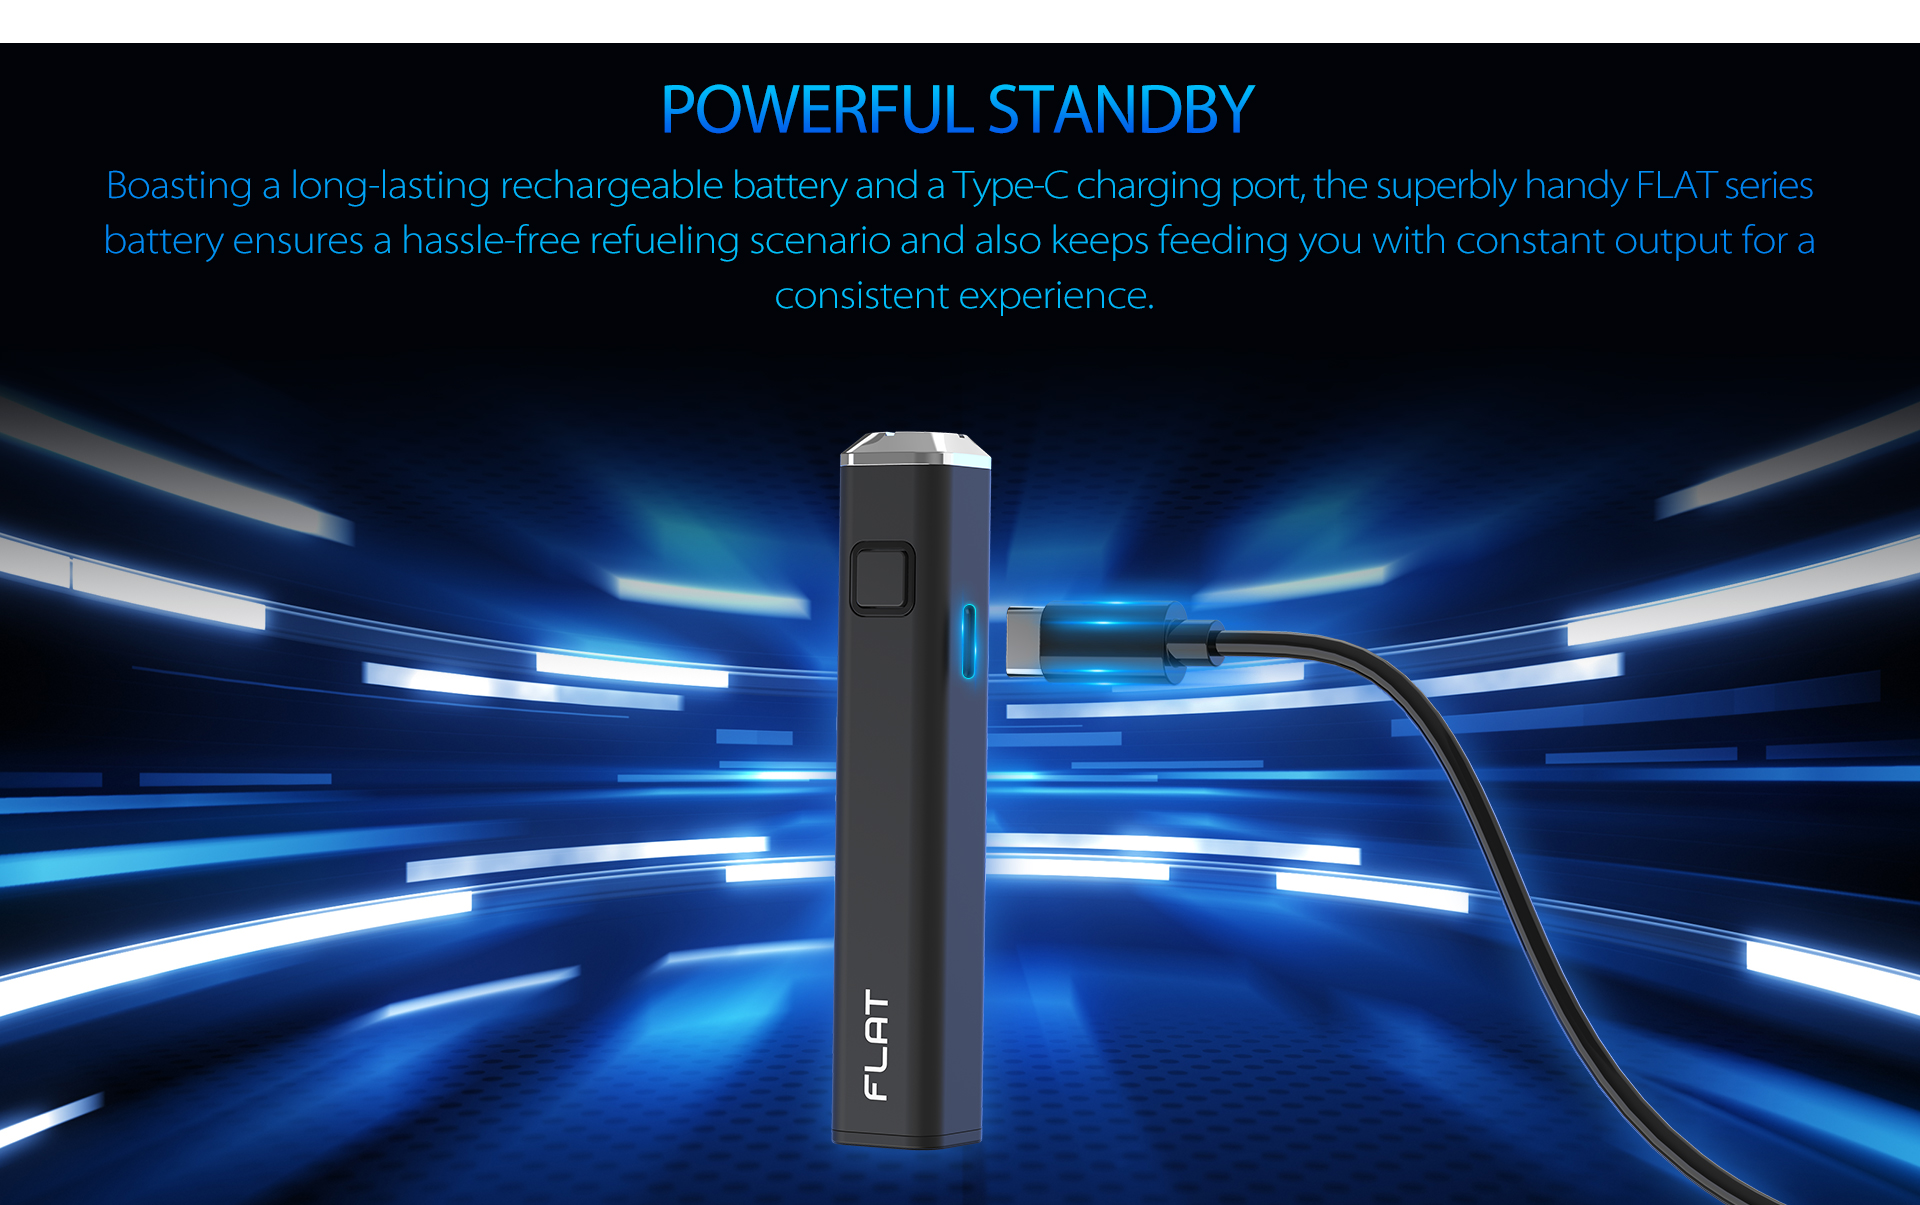 Yocan Flat Series 510 thread vape pen comes with type-c charging port.